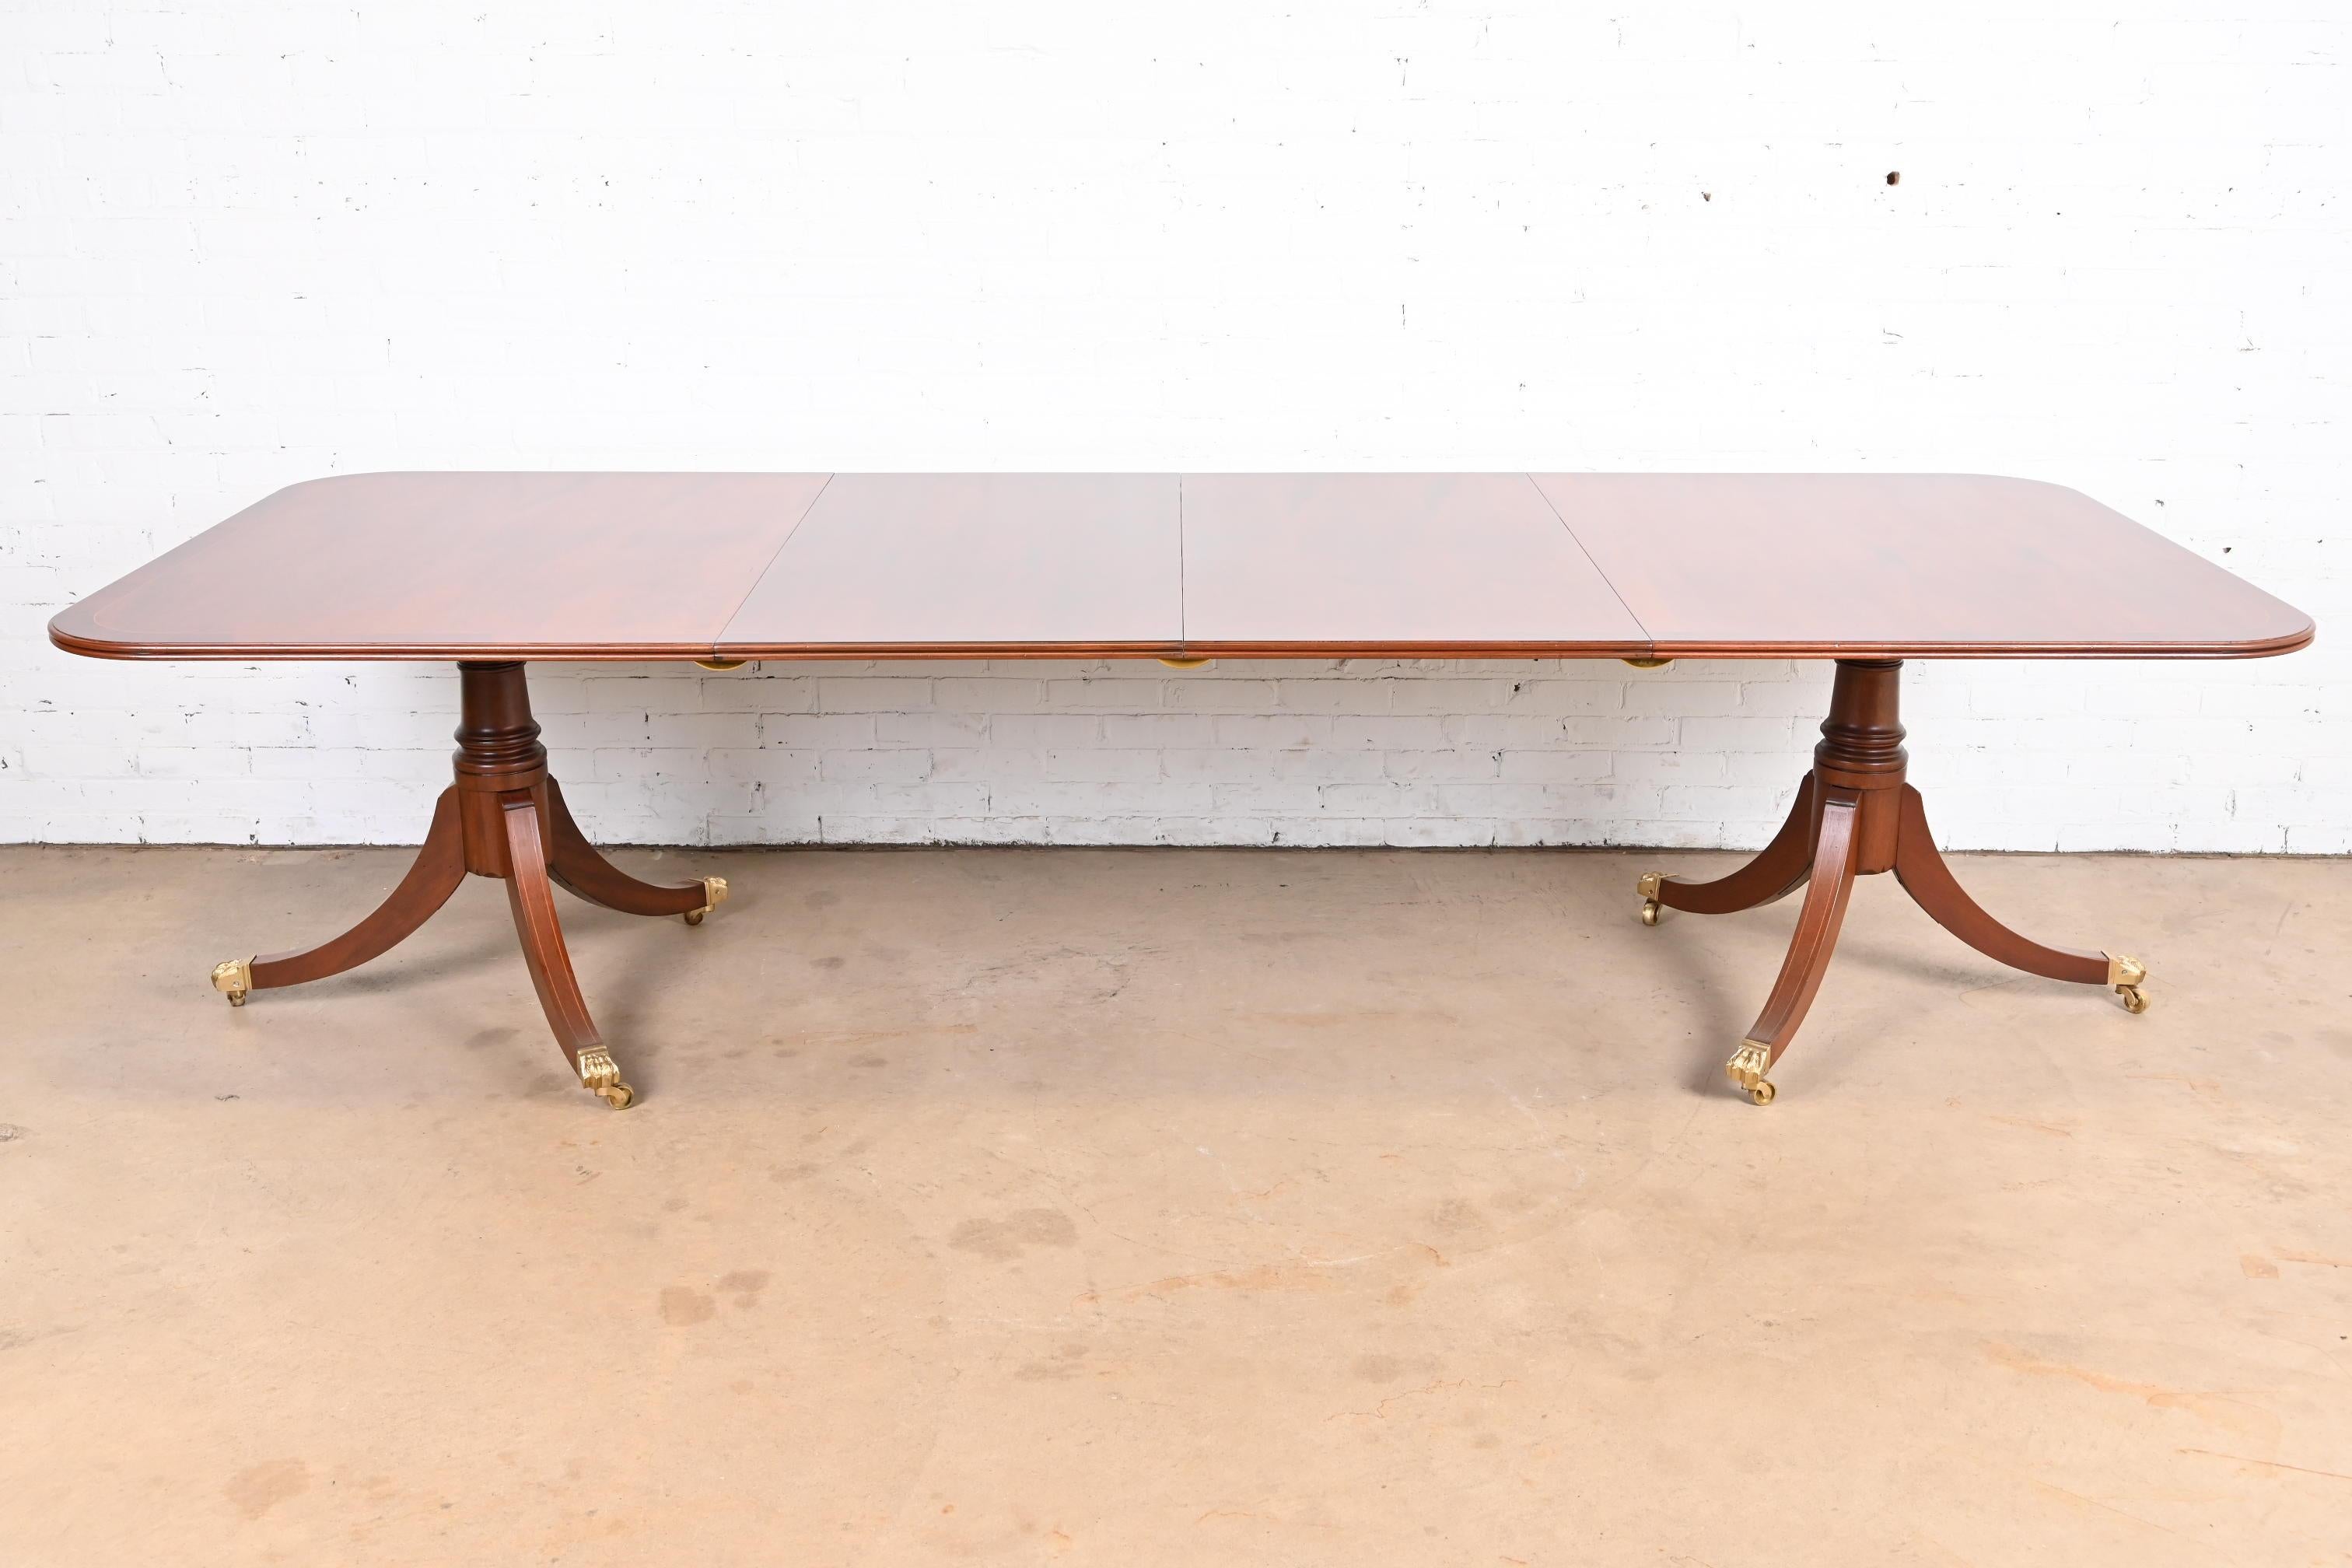 A gorgeous Georgian or Regency style double pedestal extension dining table

In the manner of Baker Furniture

USA, Circa 1960s

Beautiful banded mahogany, with satinwood string inlay, carved solid mahogany pedestals, and brass-capped paw feet on